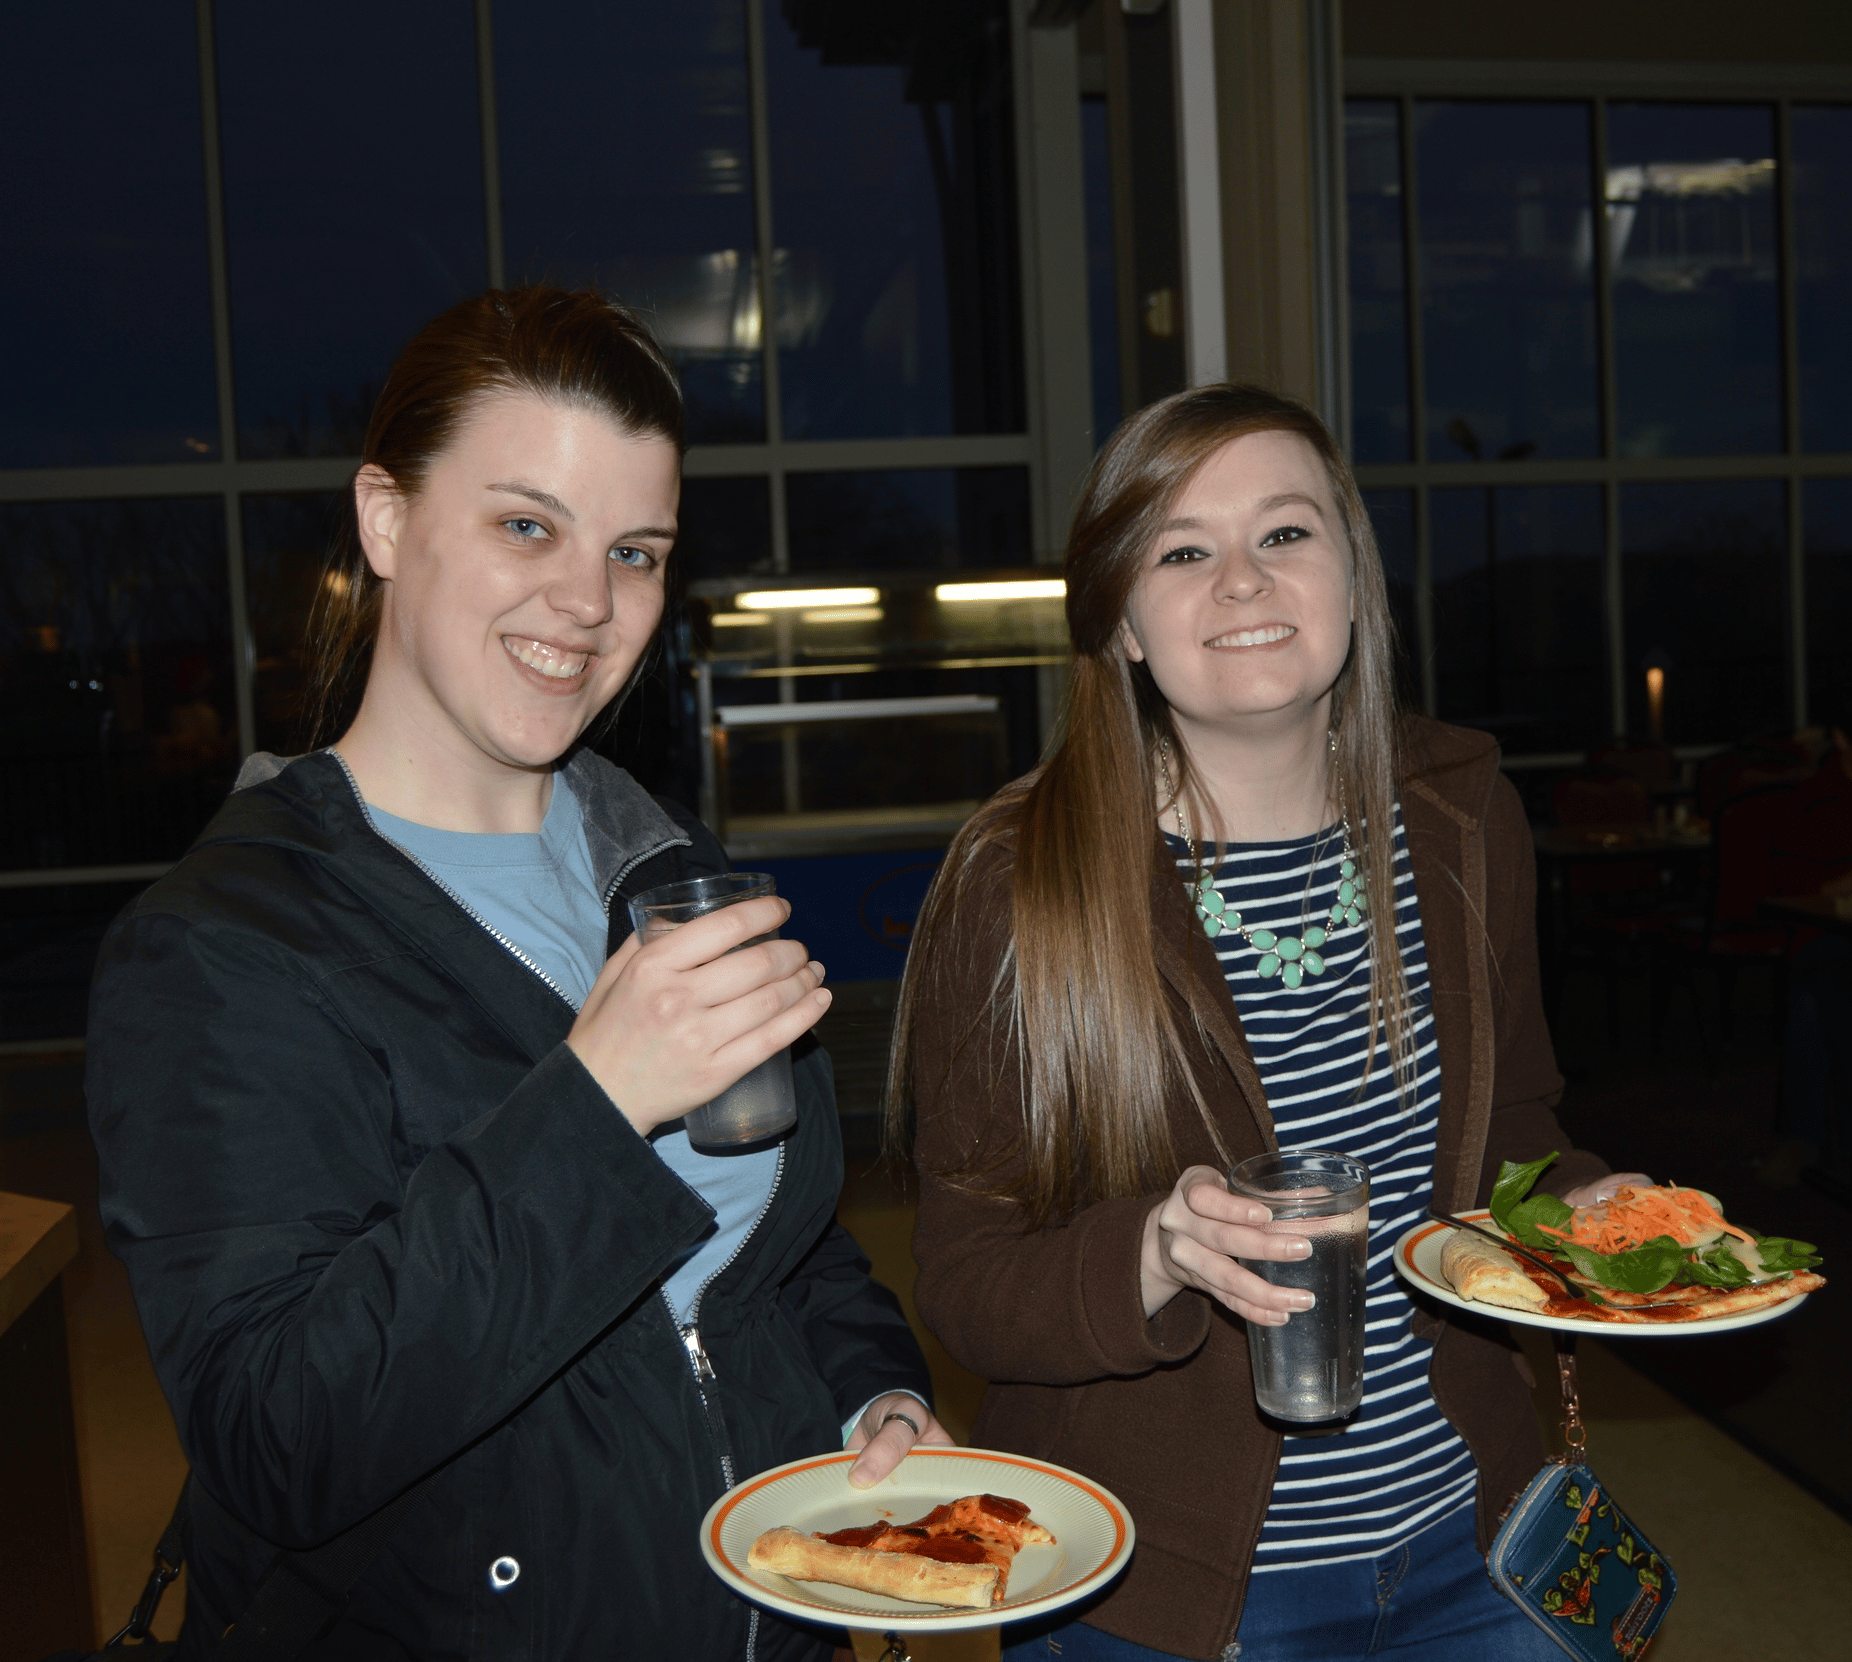 Missy Roberts and Lauren Southards grab some dinner.